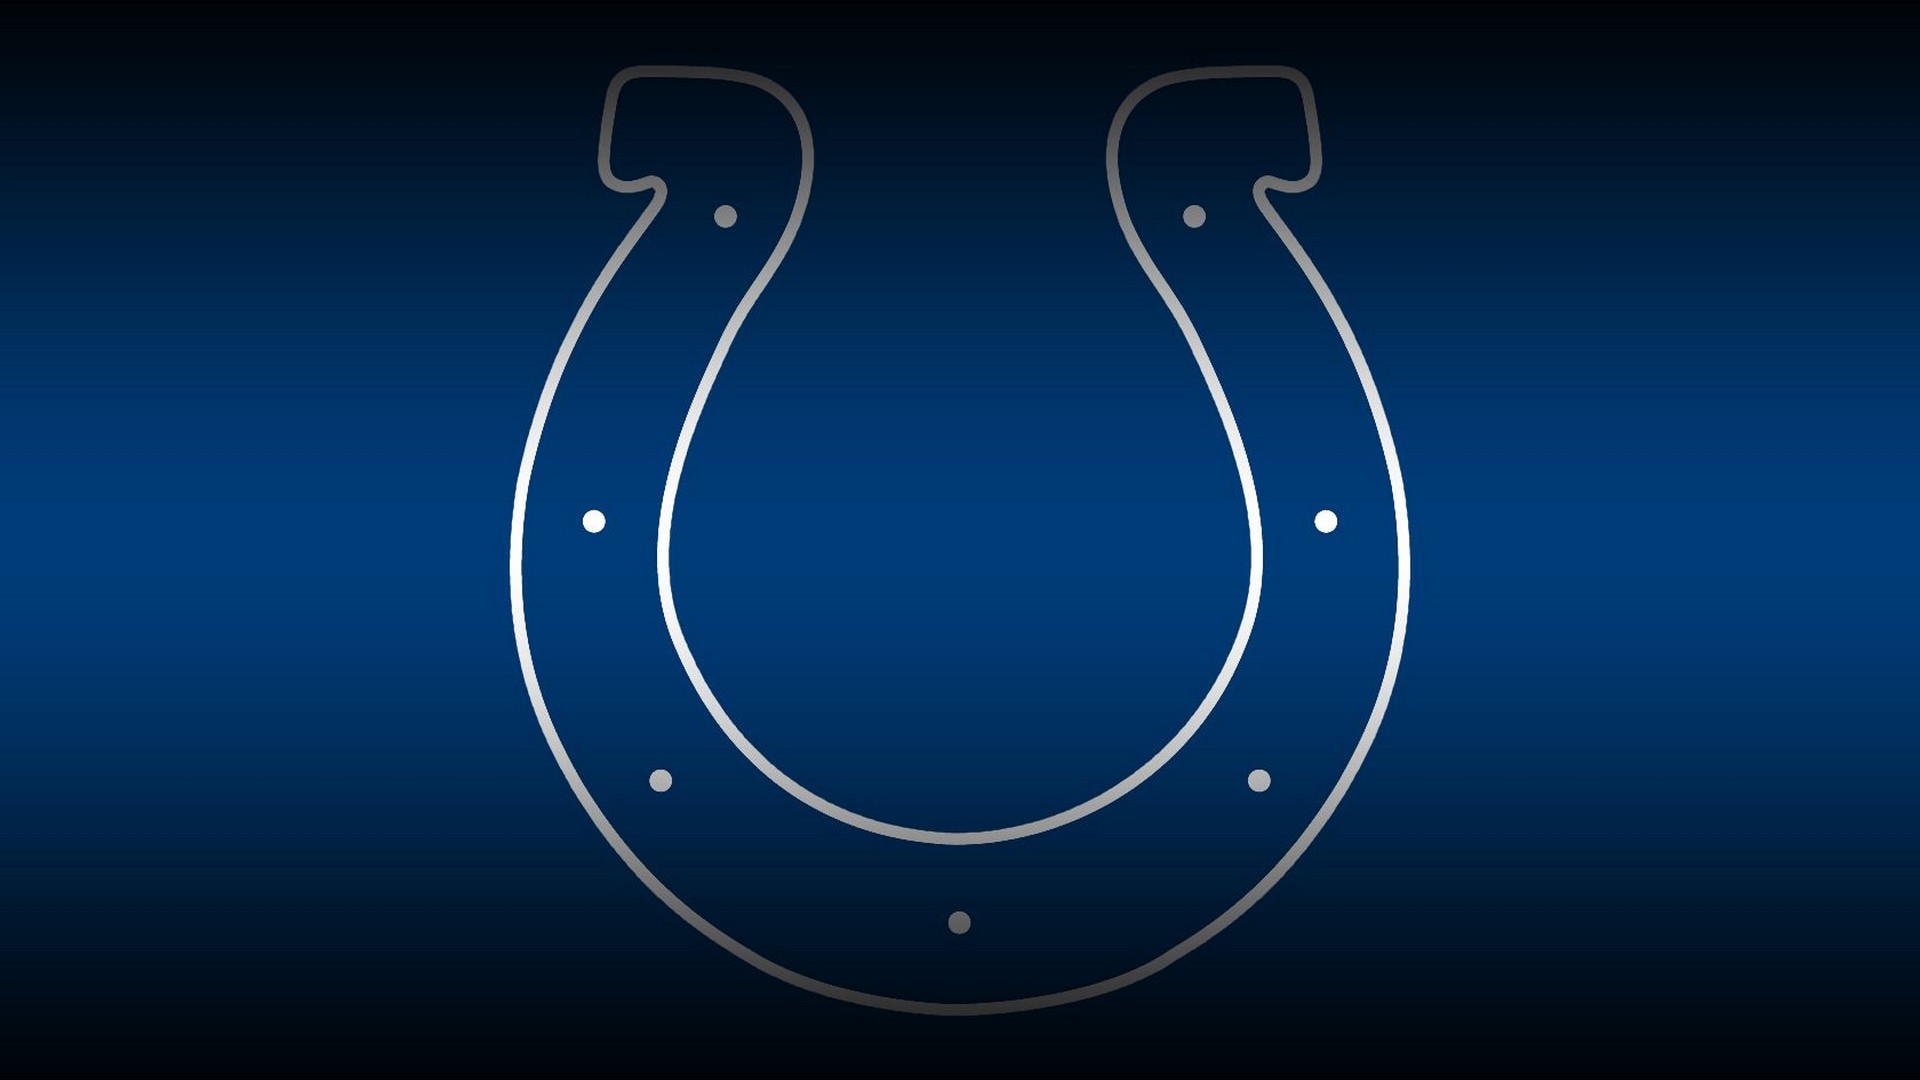 Indianapolis Colts NFL Wallpaper For Mac Backgrounds With Resolution 1920X1080 pixel. You can make this wallpaper for your Mac or Windows Desktop Background, iPhone, Android or Tablet and another Smartphone device for free